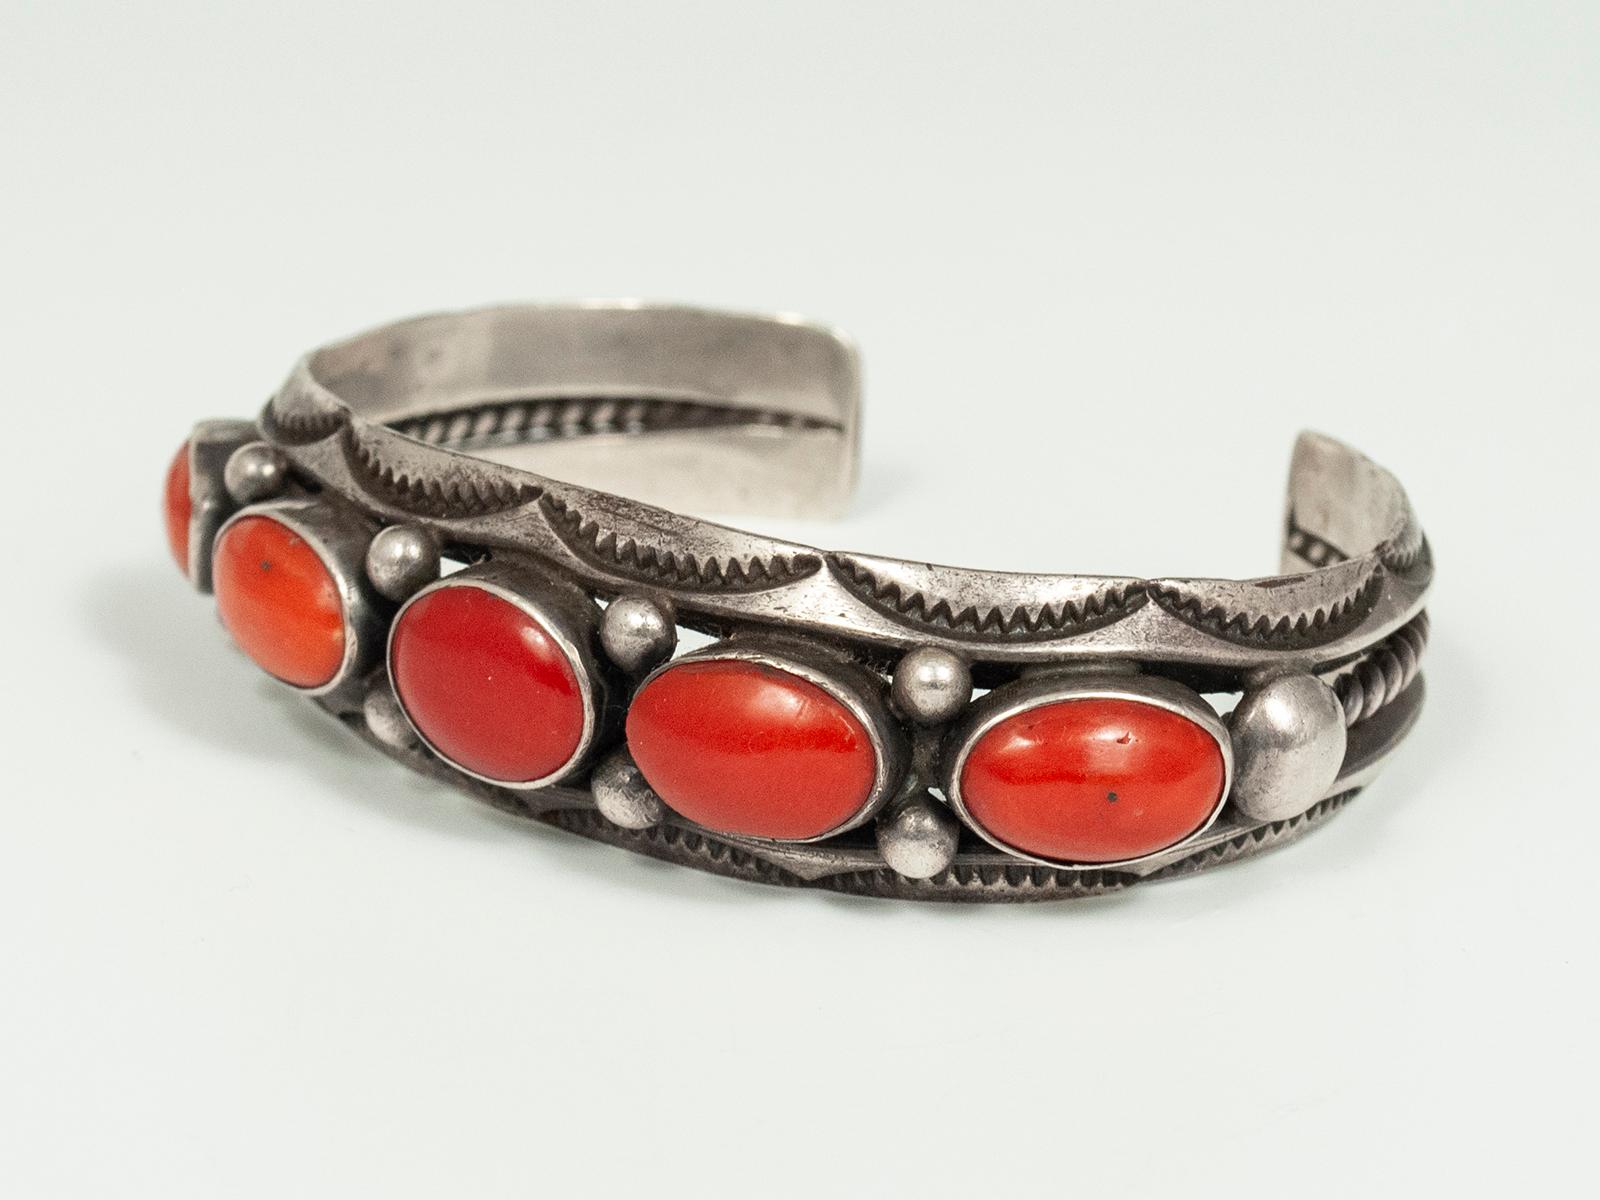 Hand-Crafted Mid-20th Century Coral and Silver Bracelet by Fred Thompson, Navajo Jeweler